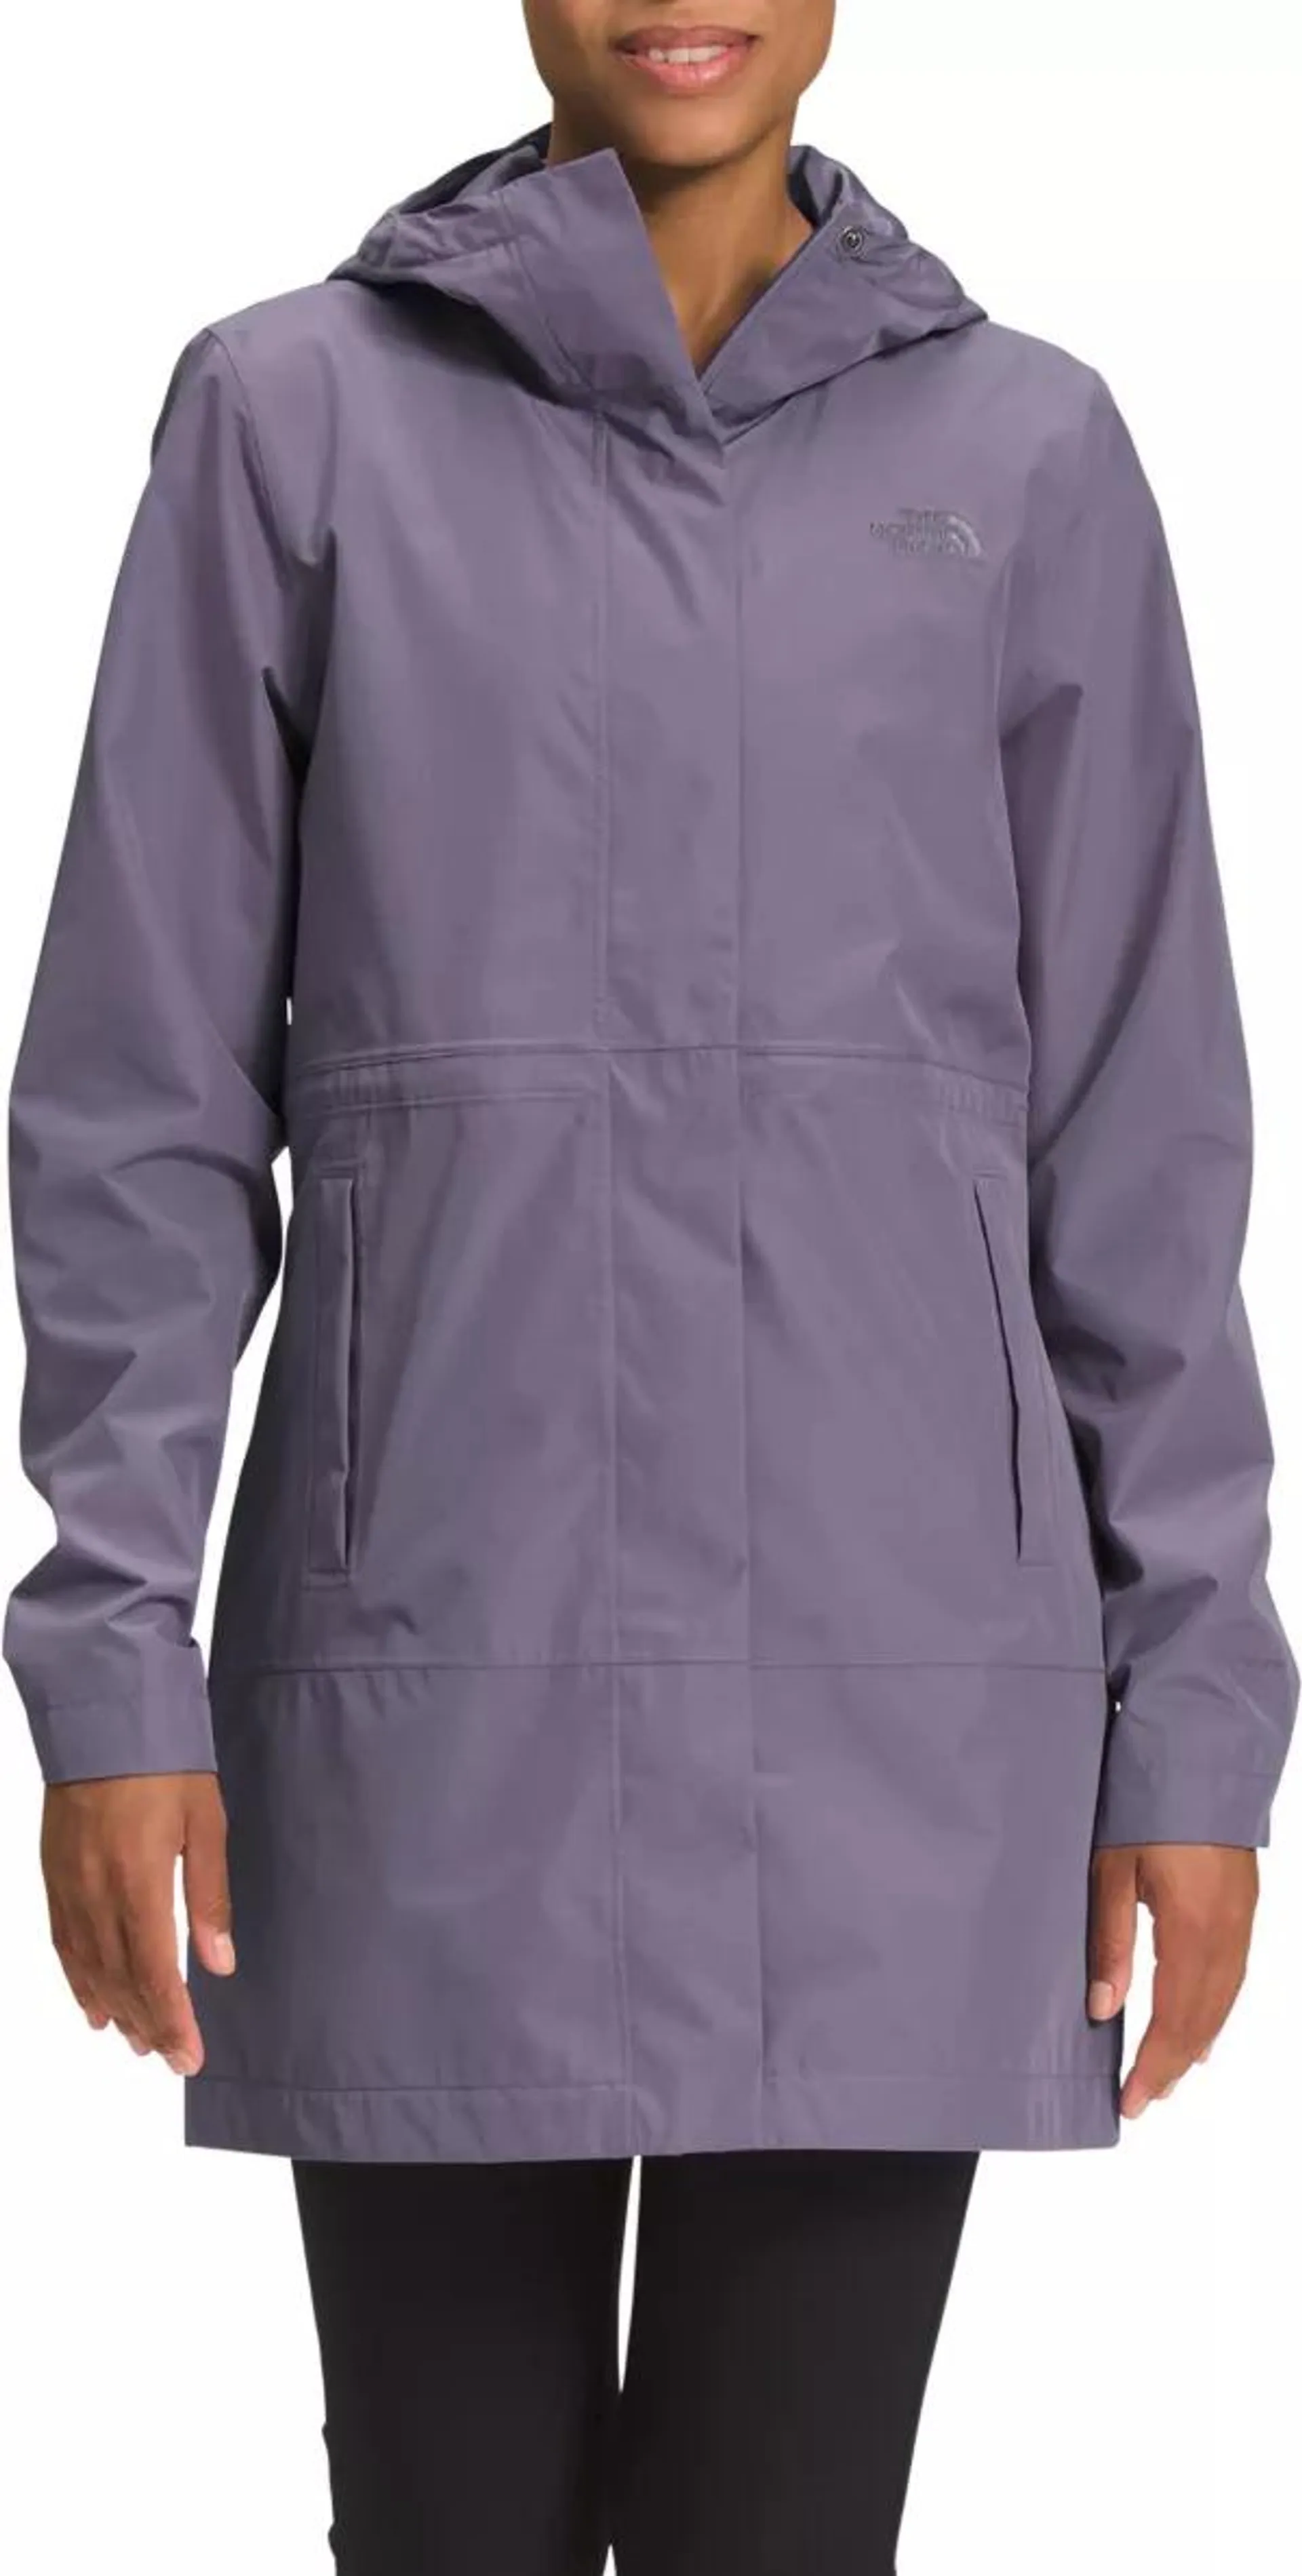 The North Face Women's Woodmont Parka